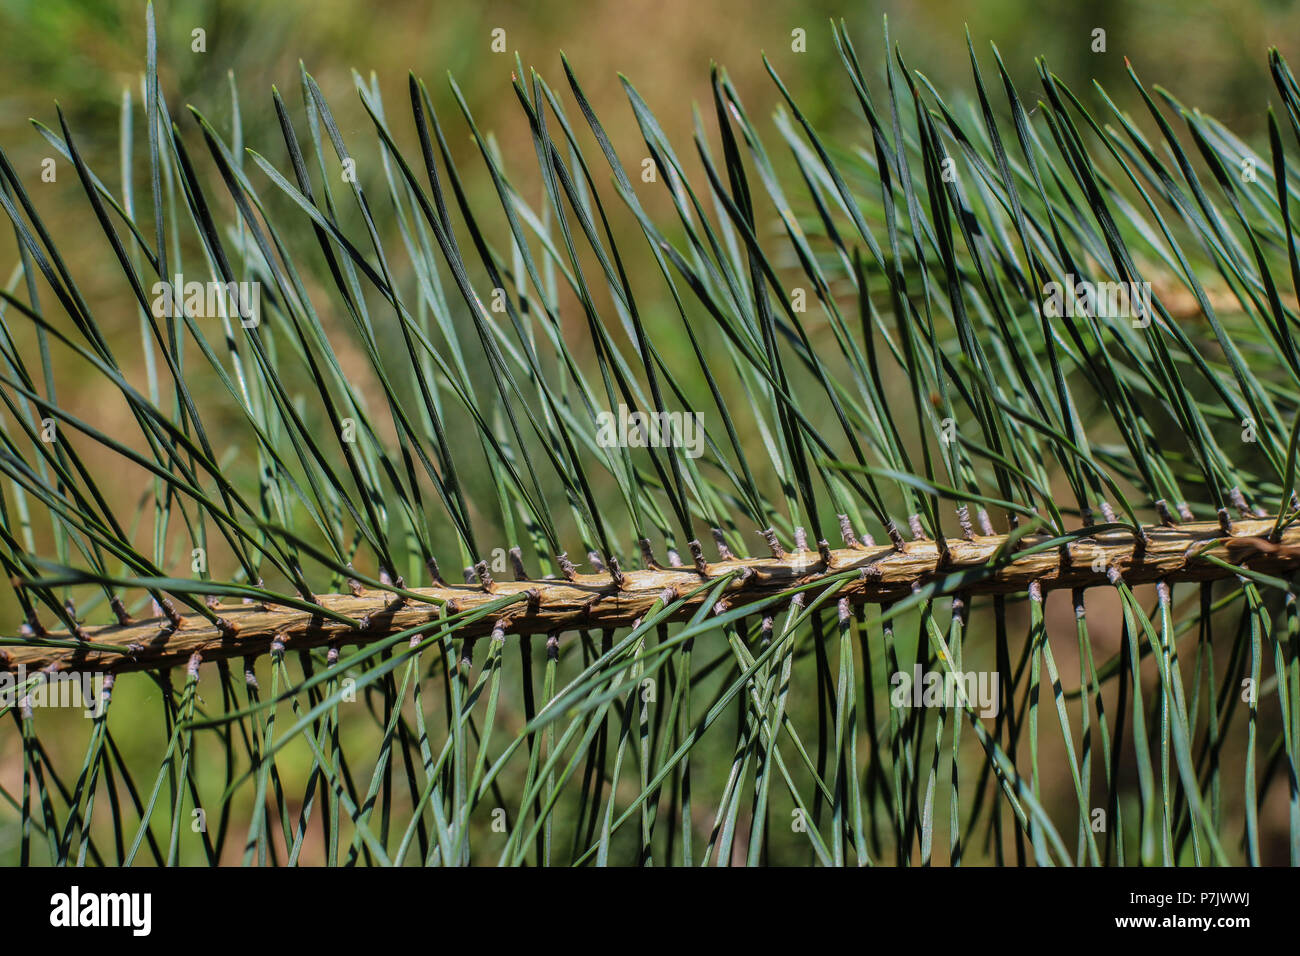 Branch of Pinus heldreichii with fascicles (bundles) of two needle leaf Stock Photo